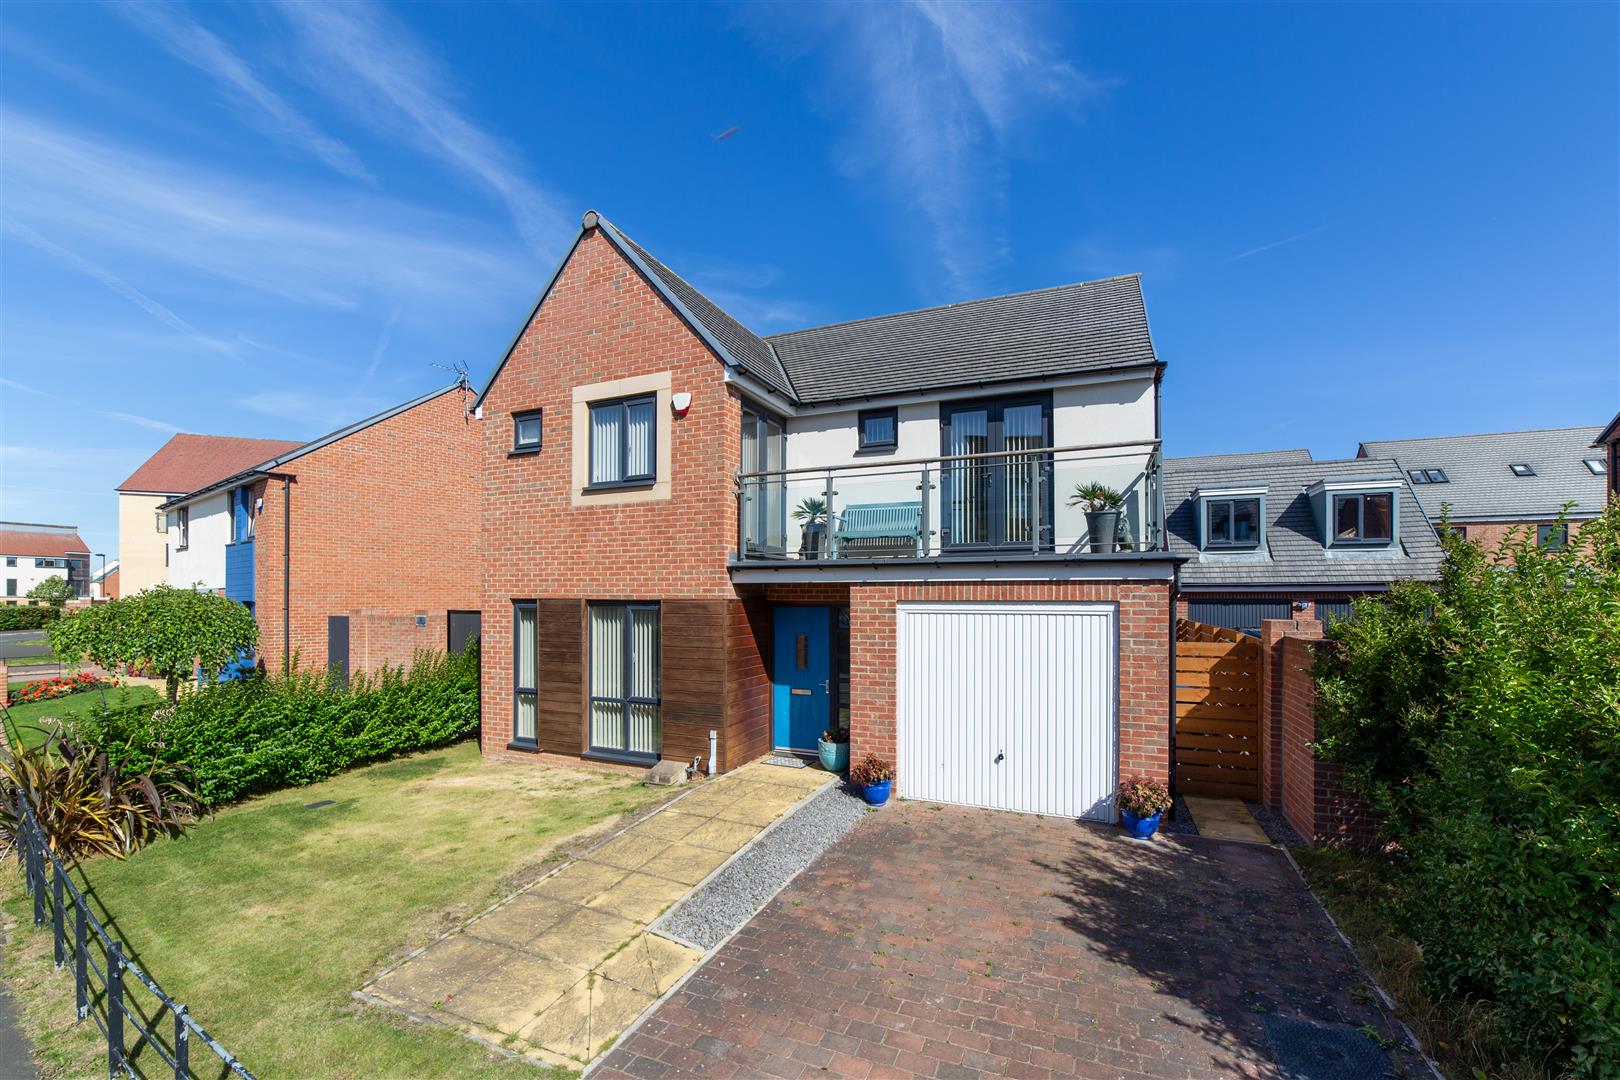 4 bed detached house for sale in Newstead Road, Great Park, NE13